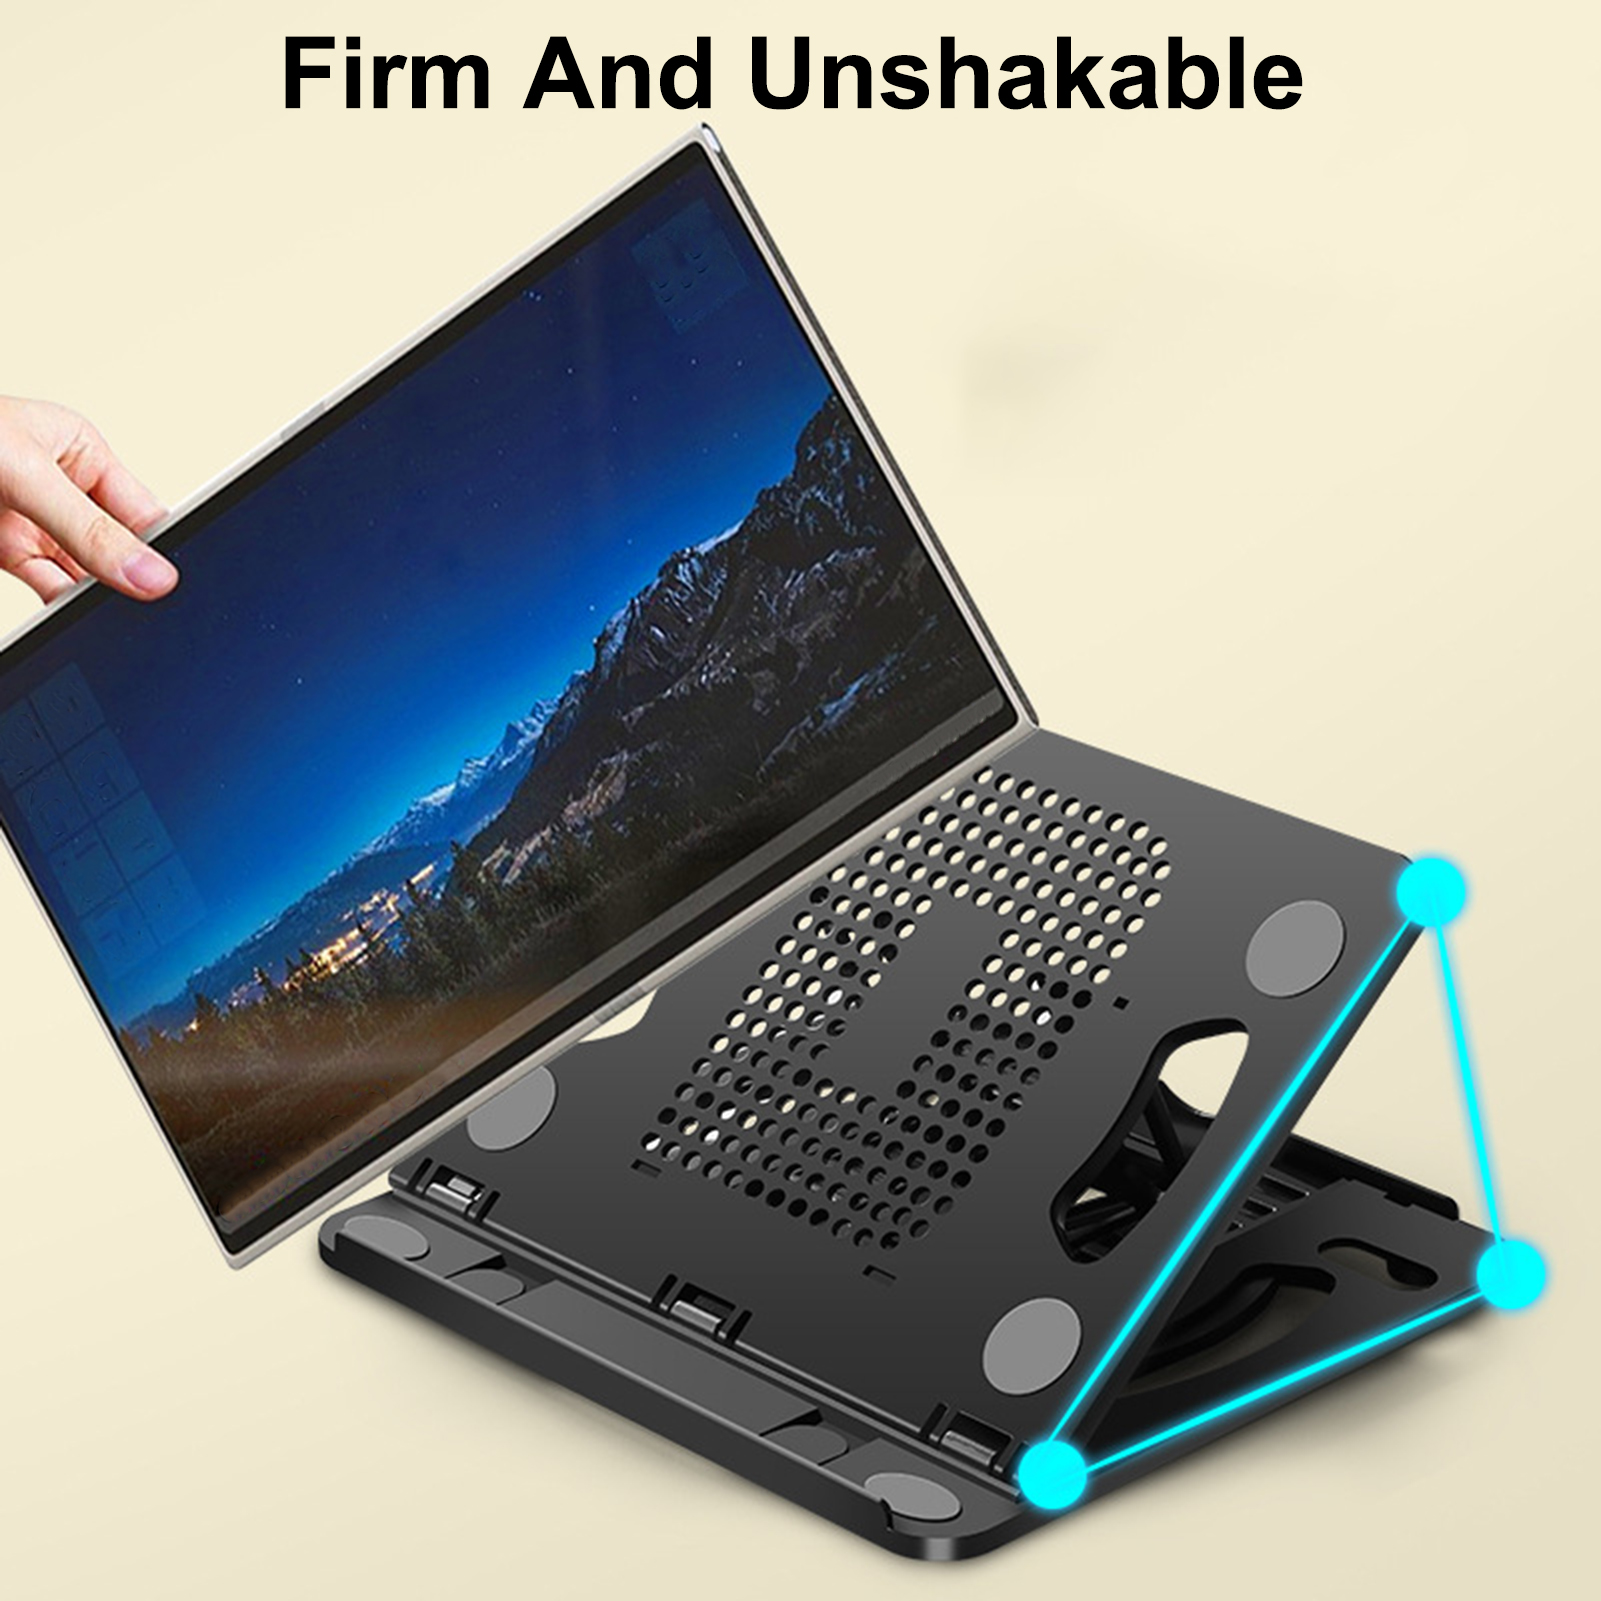 Lomubue Laptop Stand Hollow-out Heat Dissipation 8-speed Angle Adjustable Free Lift Stable Support Dual-use Phone Tablet Folding Stand Desktop Holder Office Supplies - image 3 of 10